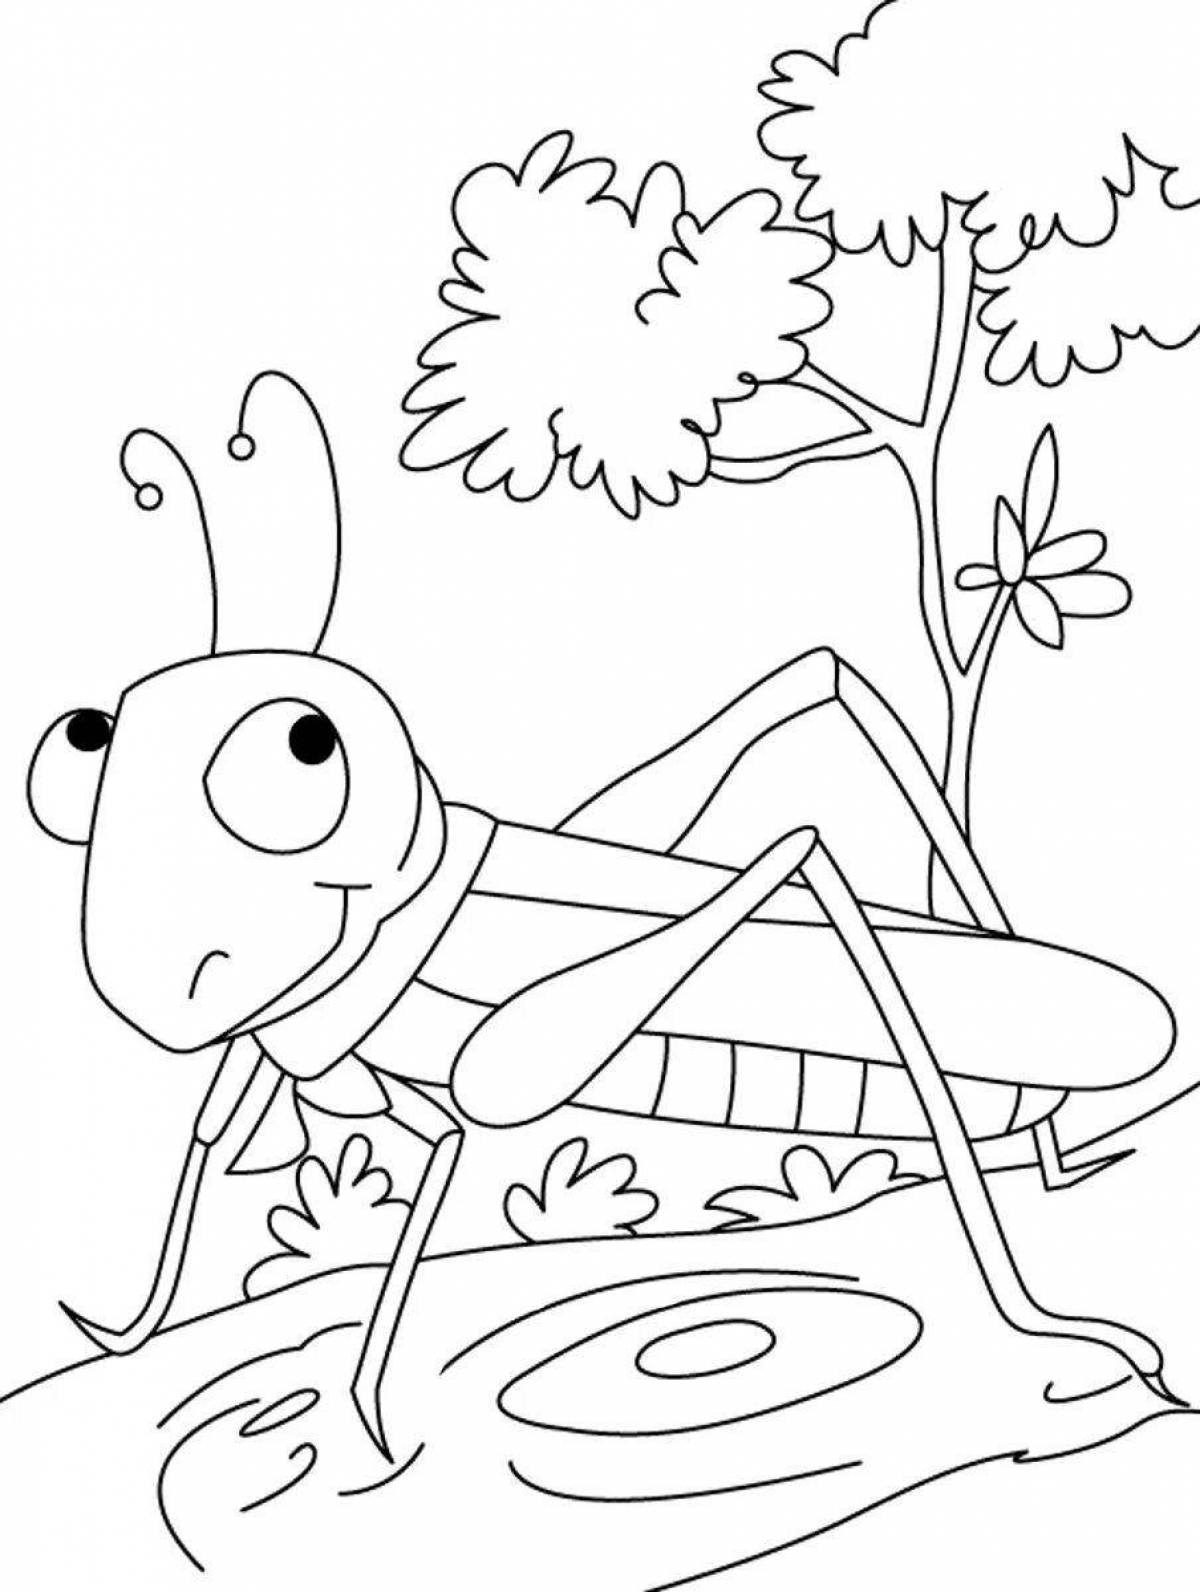 Cricket Coloring Page with Color Splashes